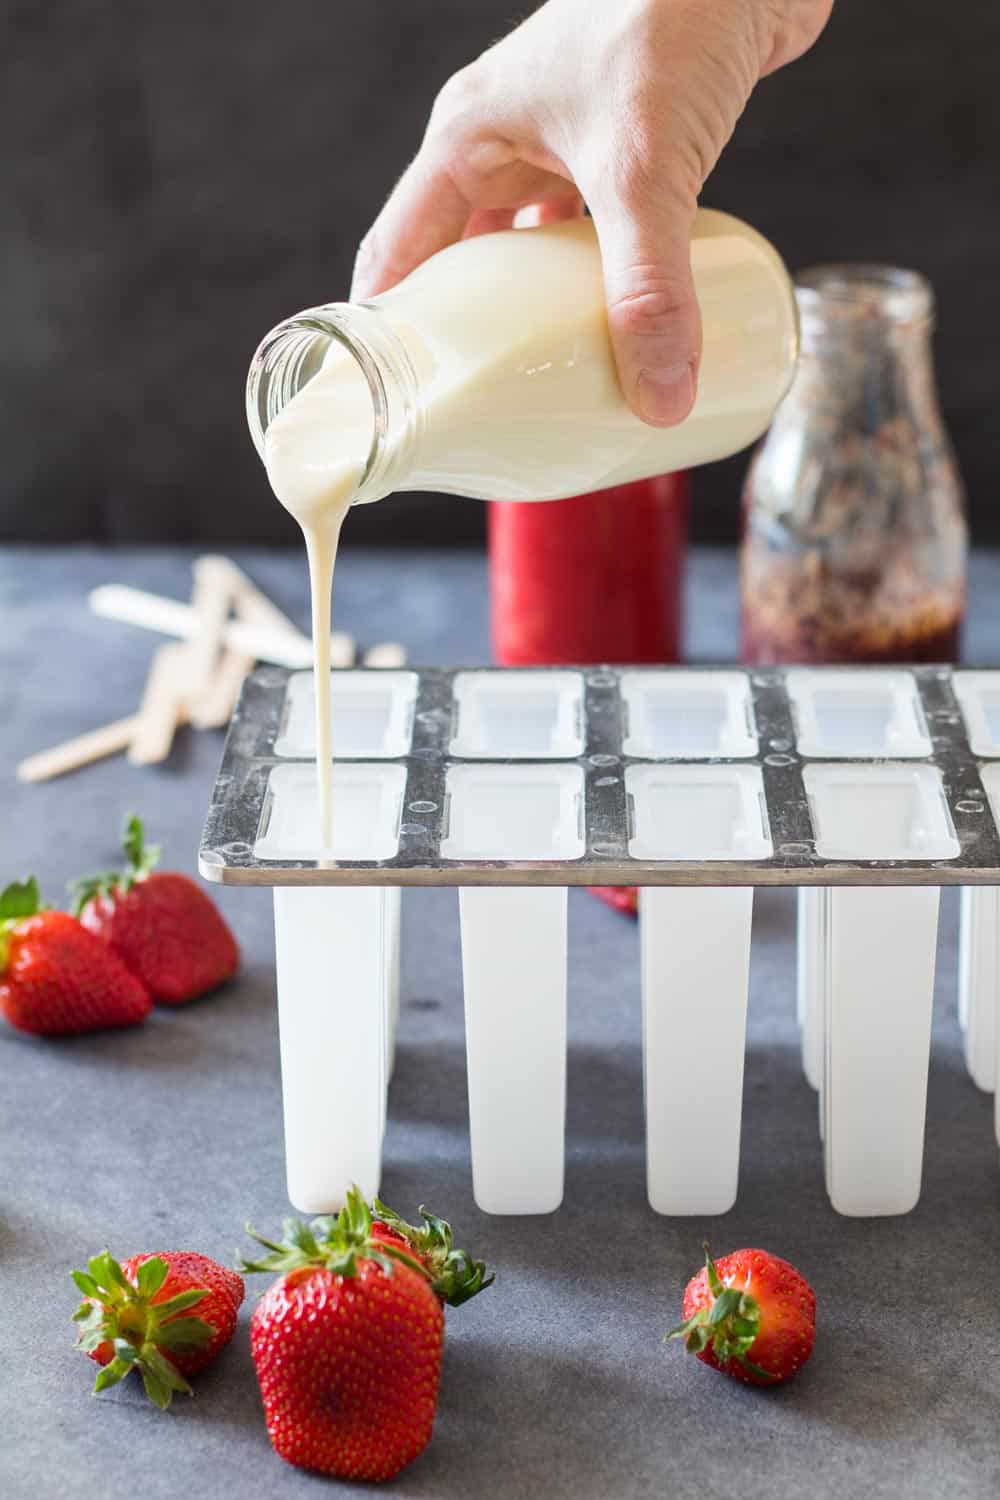 Hand pouring greek yogurt mix into popsicles mold.